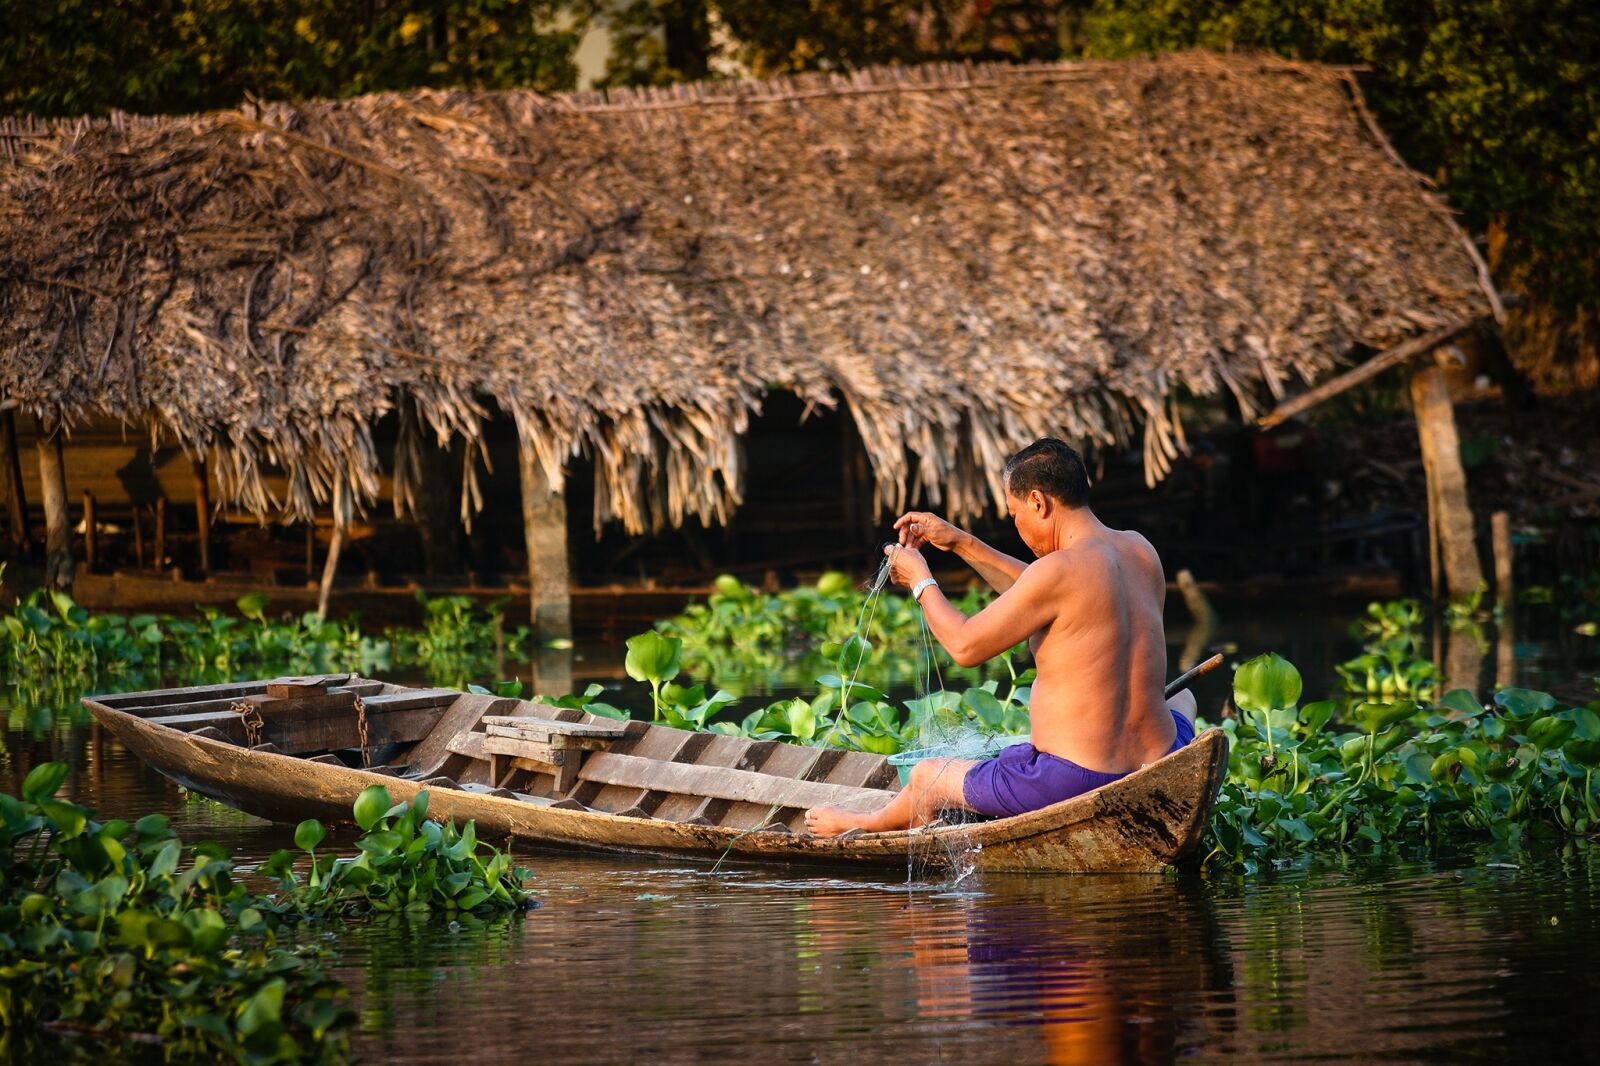 IS USM sample photo. Fish men, subsistence, life photography